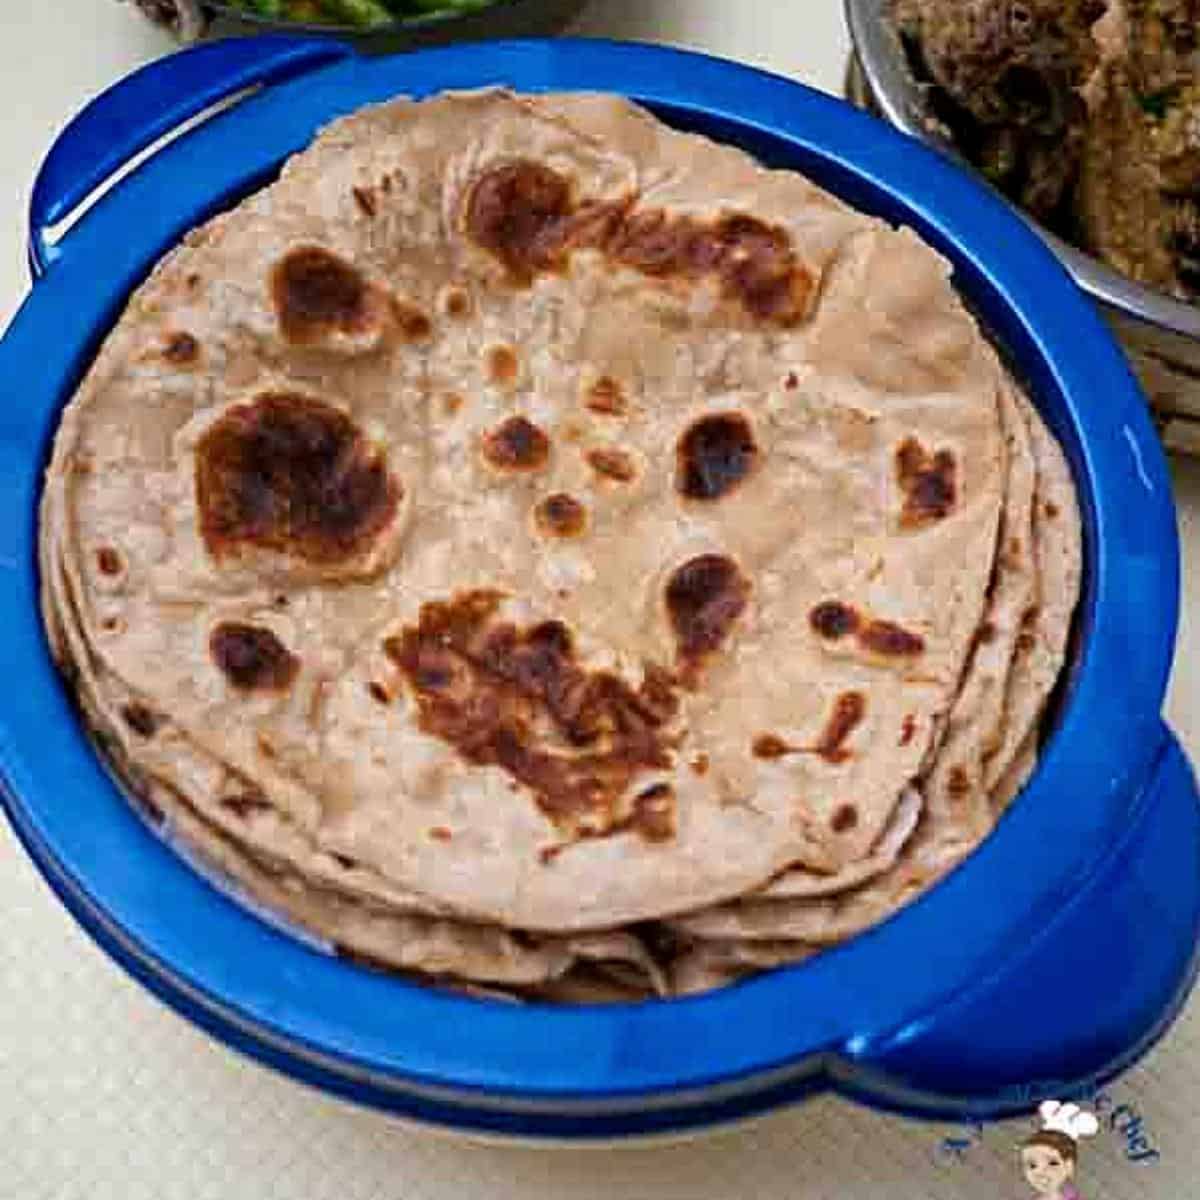 A tupperware with tortillas or chapati made with whole wheat flour. 